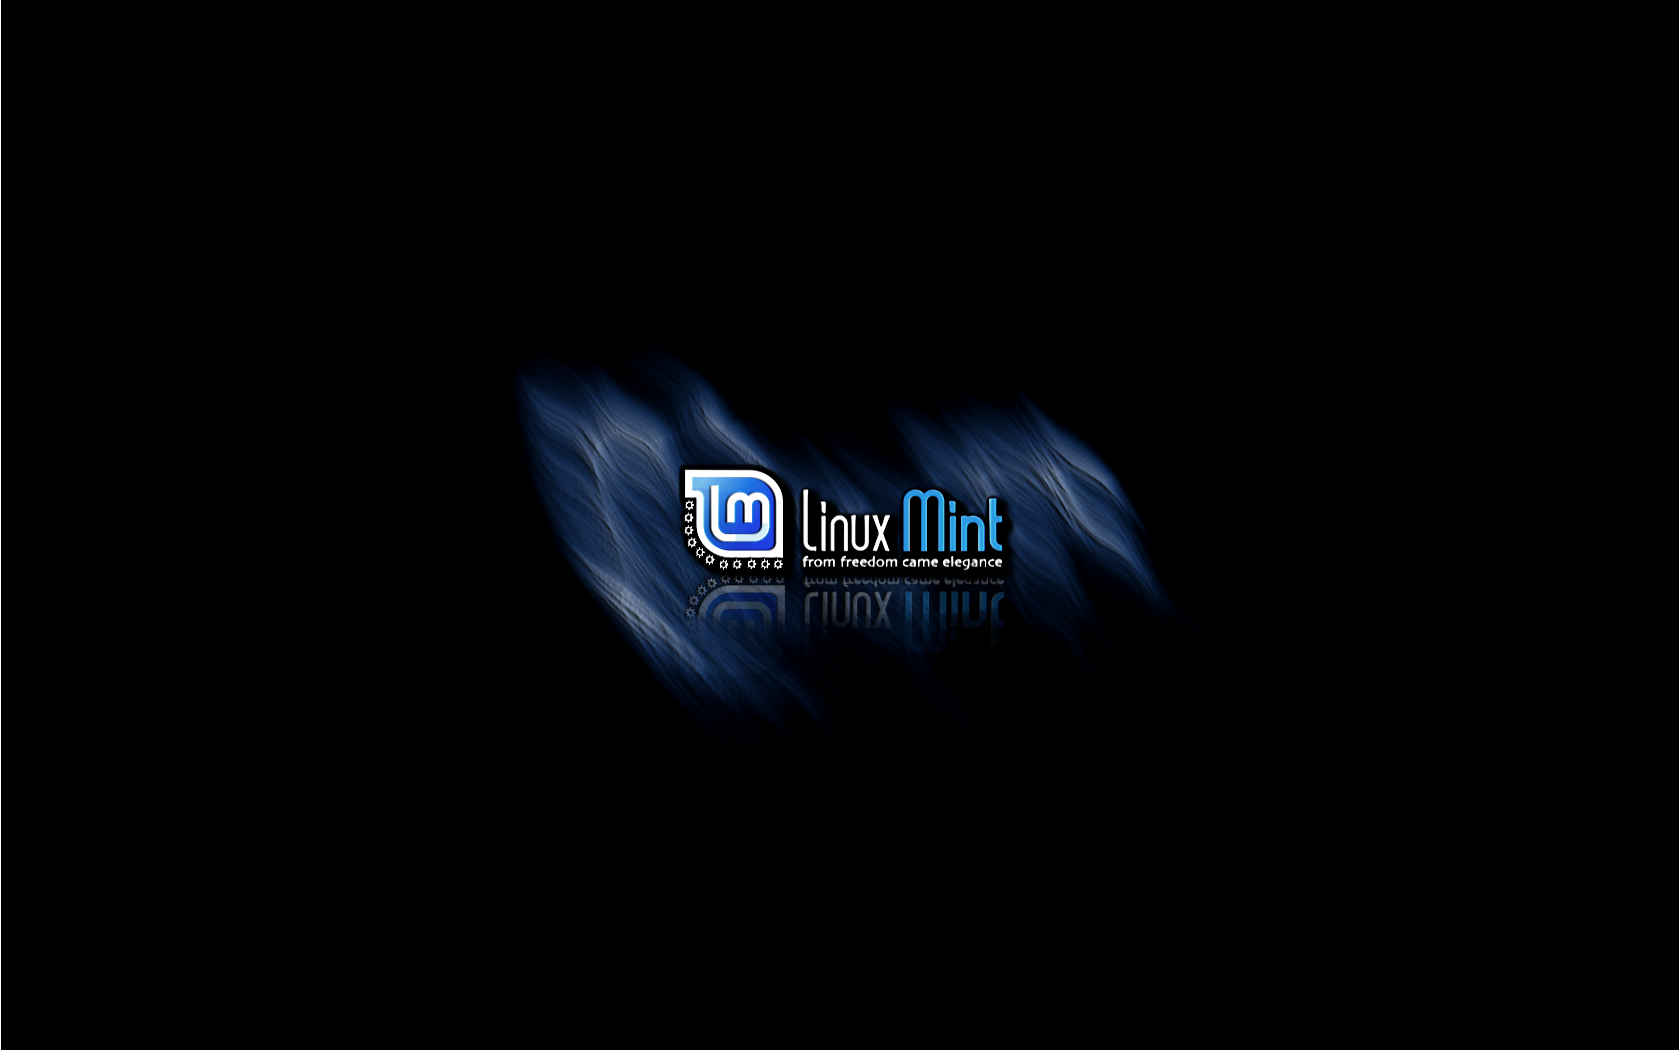 Forums Topic Yet Another Kde Wallpaper Minty Blue Flame